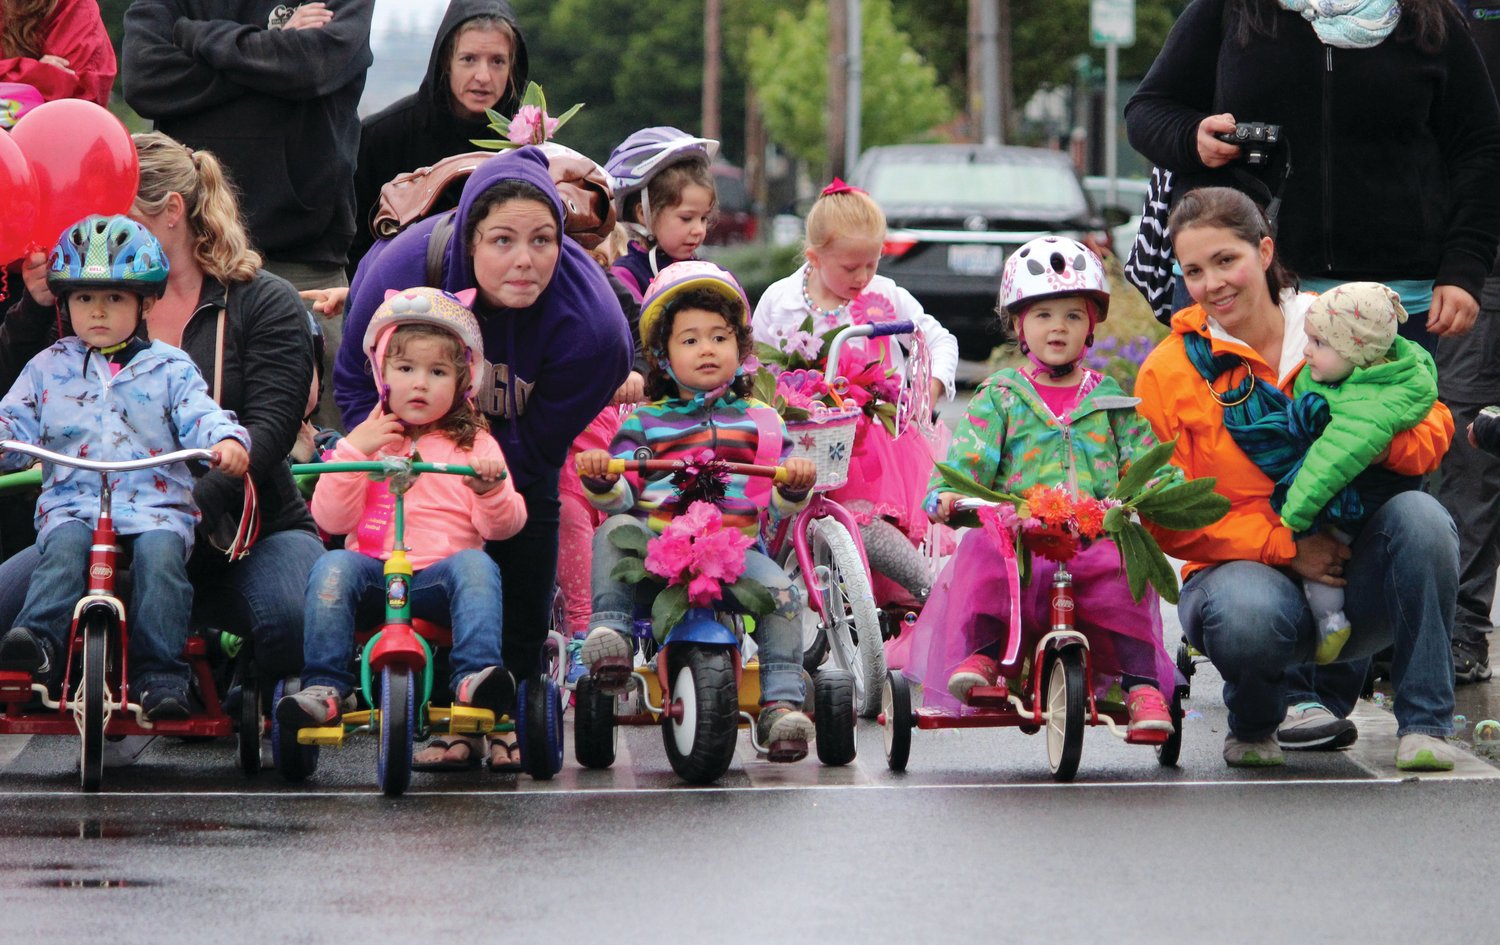 Kids line up for the Trike Race during an earlier Rhody Festival.